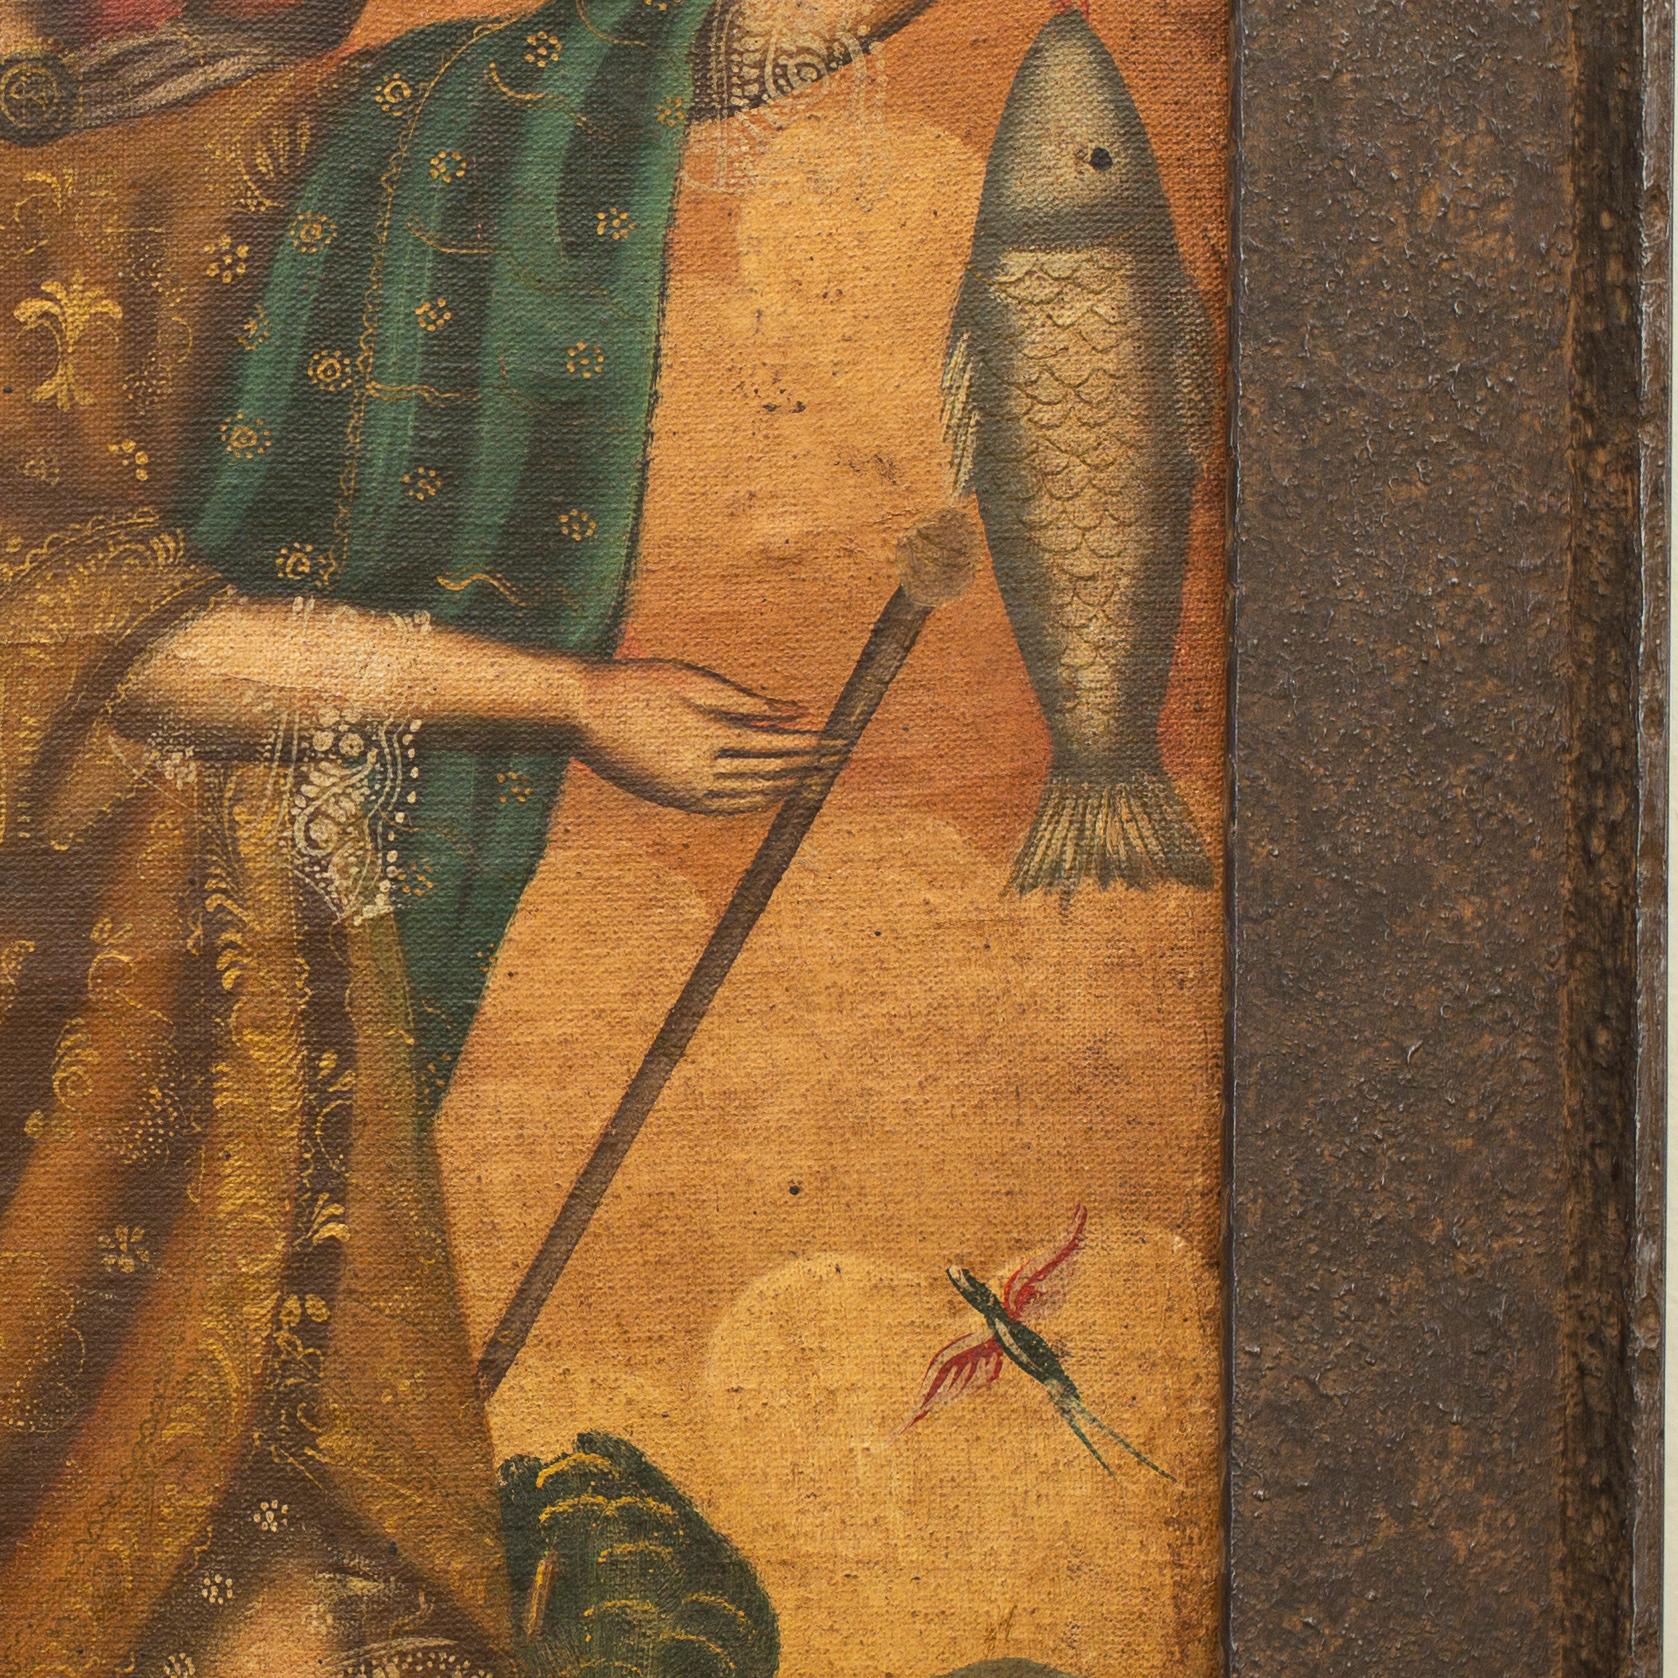 Cuzco School - A Portrait of Archangel Raphael With Fish, 1800s, Oil on Canvas - Brown Portrait Painting by Unknown